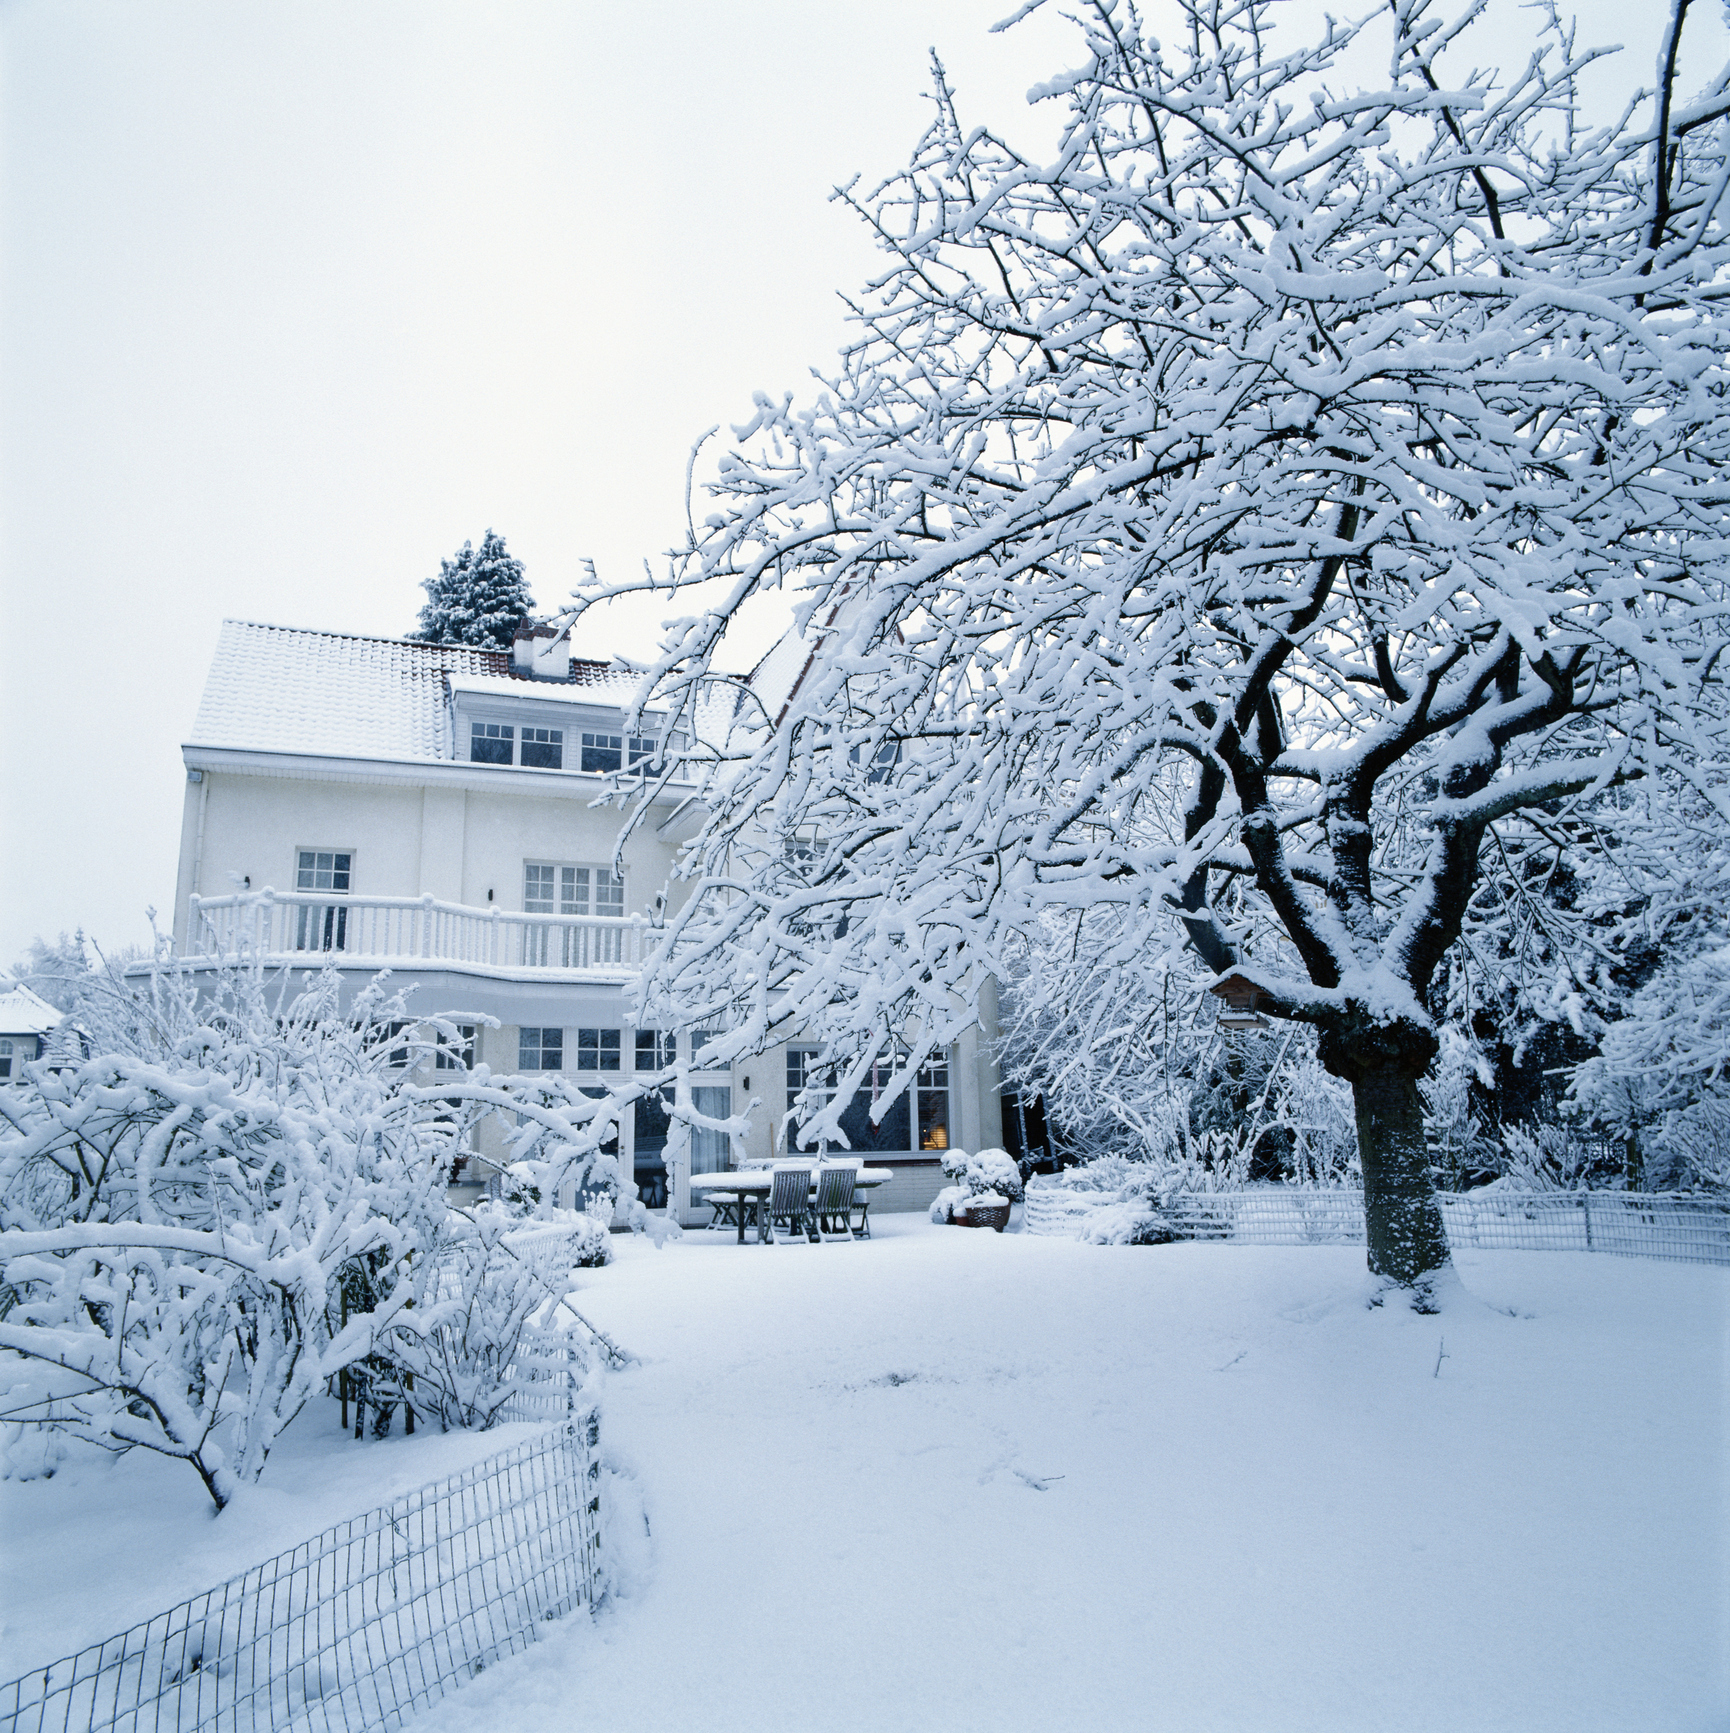 Remember Snowtember? The Unforeseen risks to your home